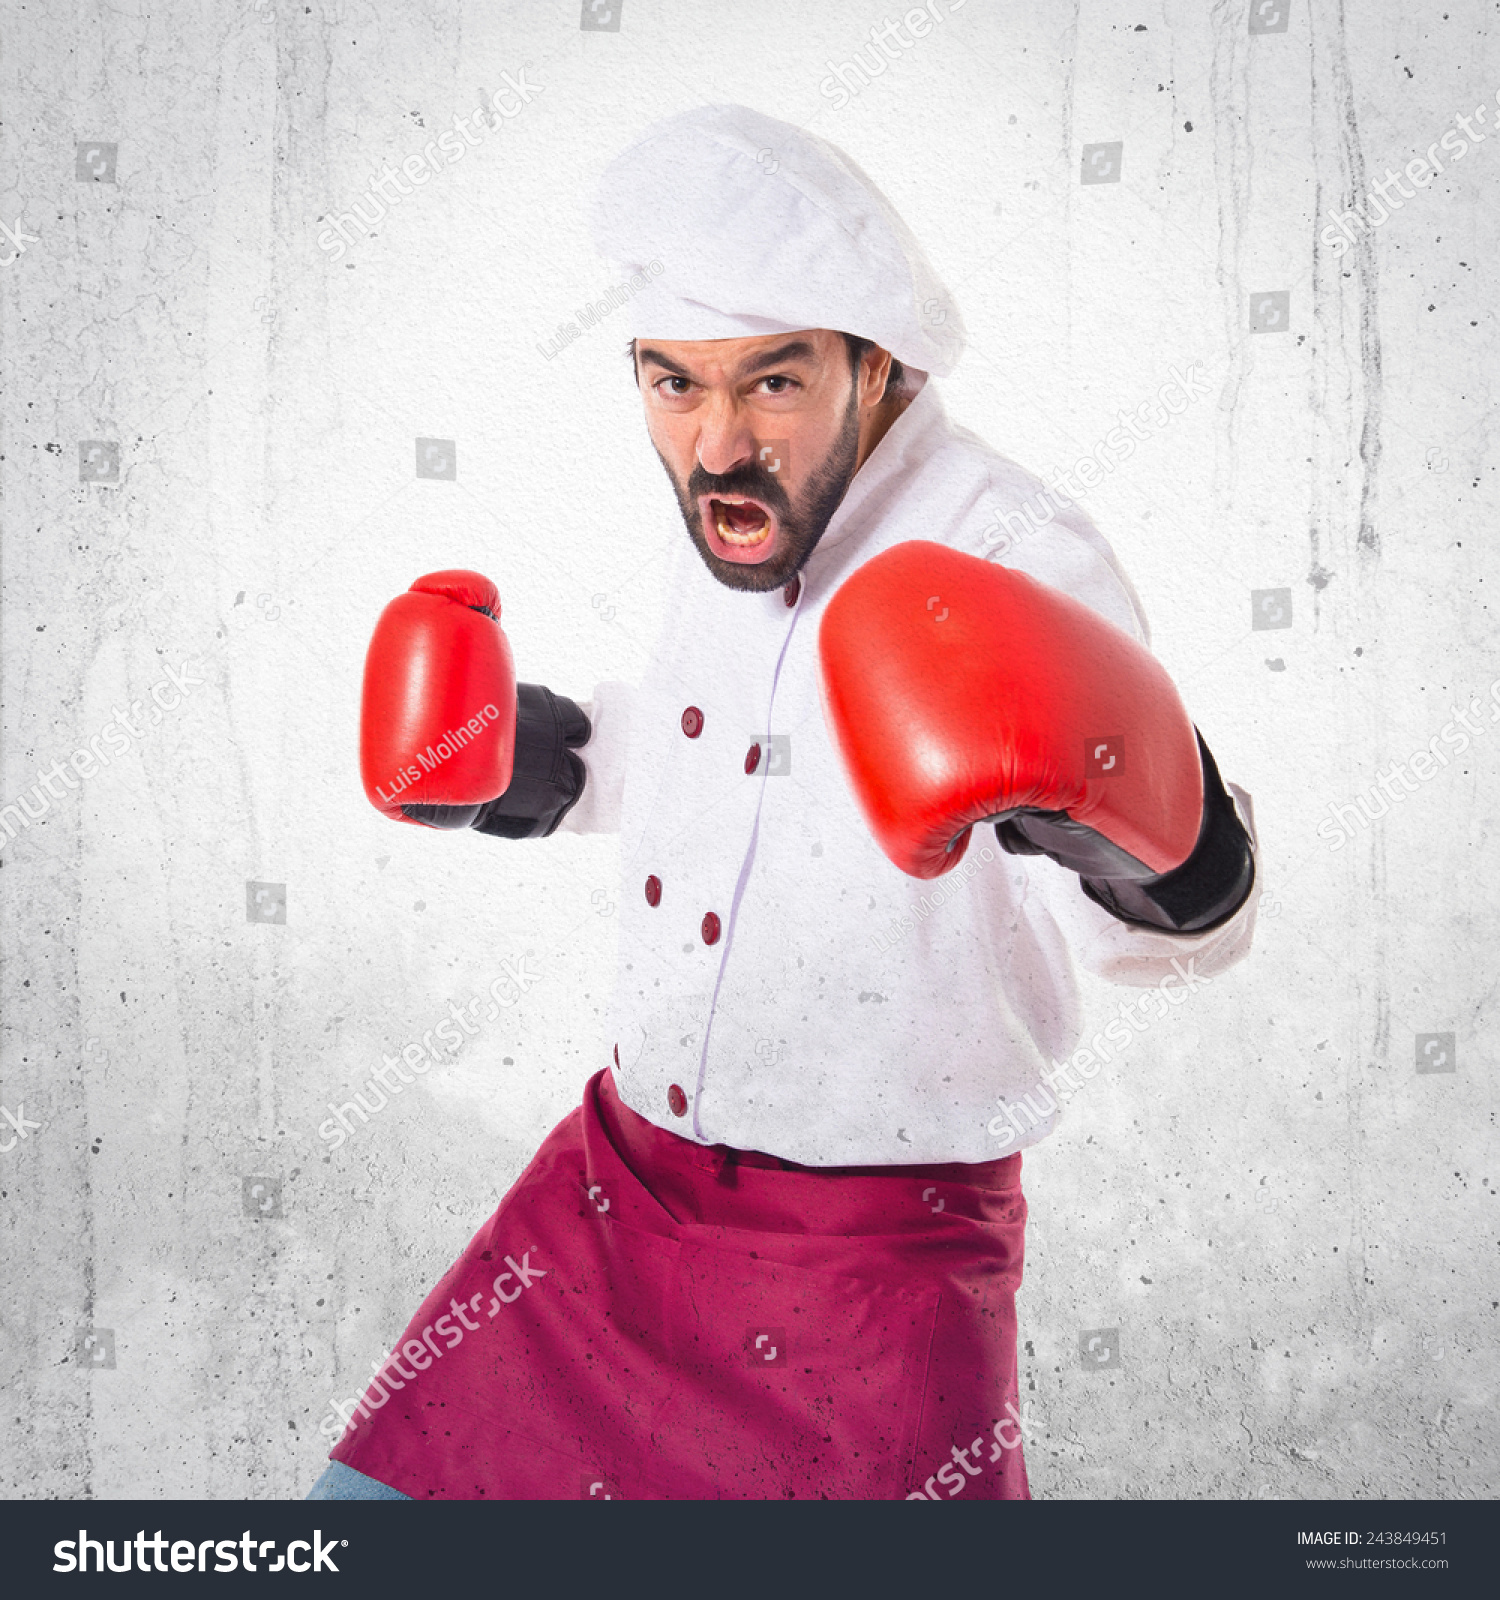 Chef fighting with boxing gloves over textured background #243849451